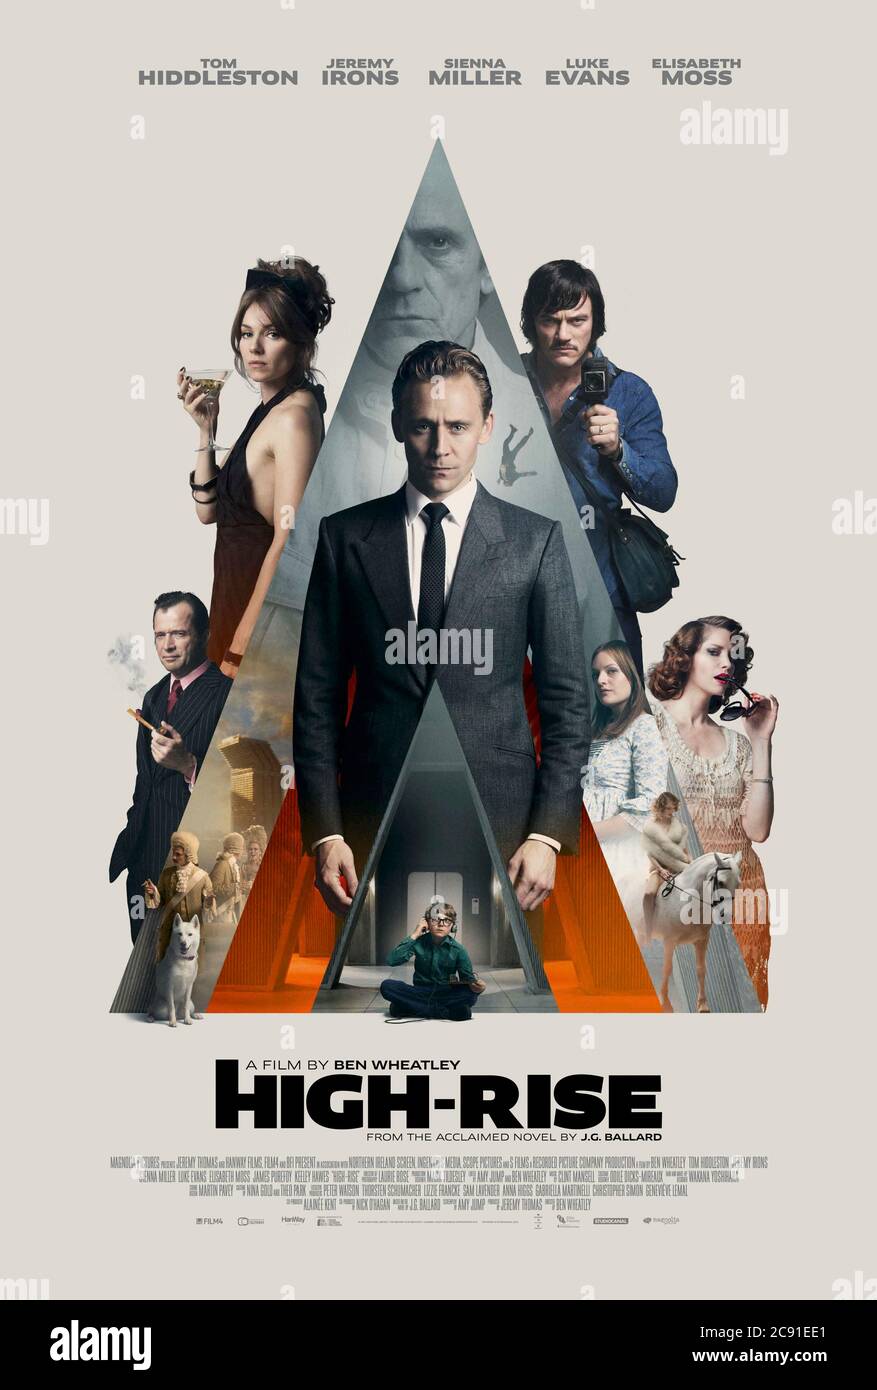 High-Rise (2015) directed by Ben Wheatley and starring Tom Hiddleston, Jeremy Irons, Sienna Miller and Luke Evans. Adaptation of J.G. Ballard's allegorical novel about the residents of a luxury tower block that descends into chaos. Stock Photo